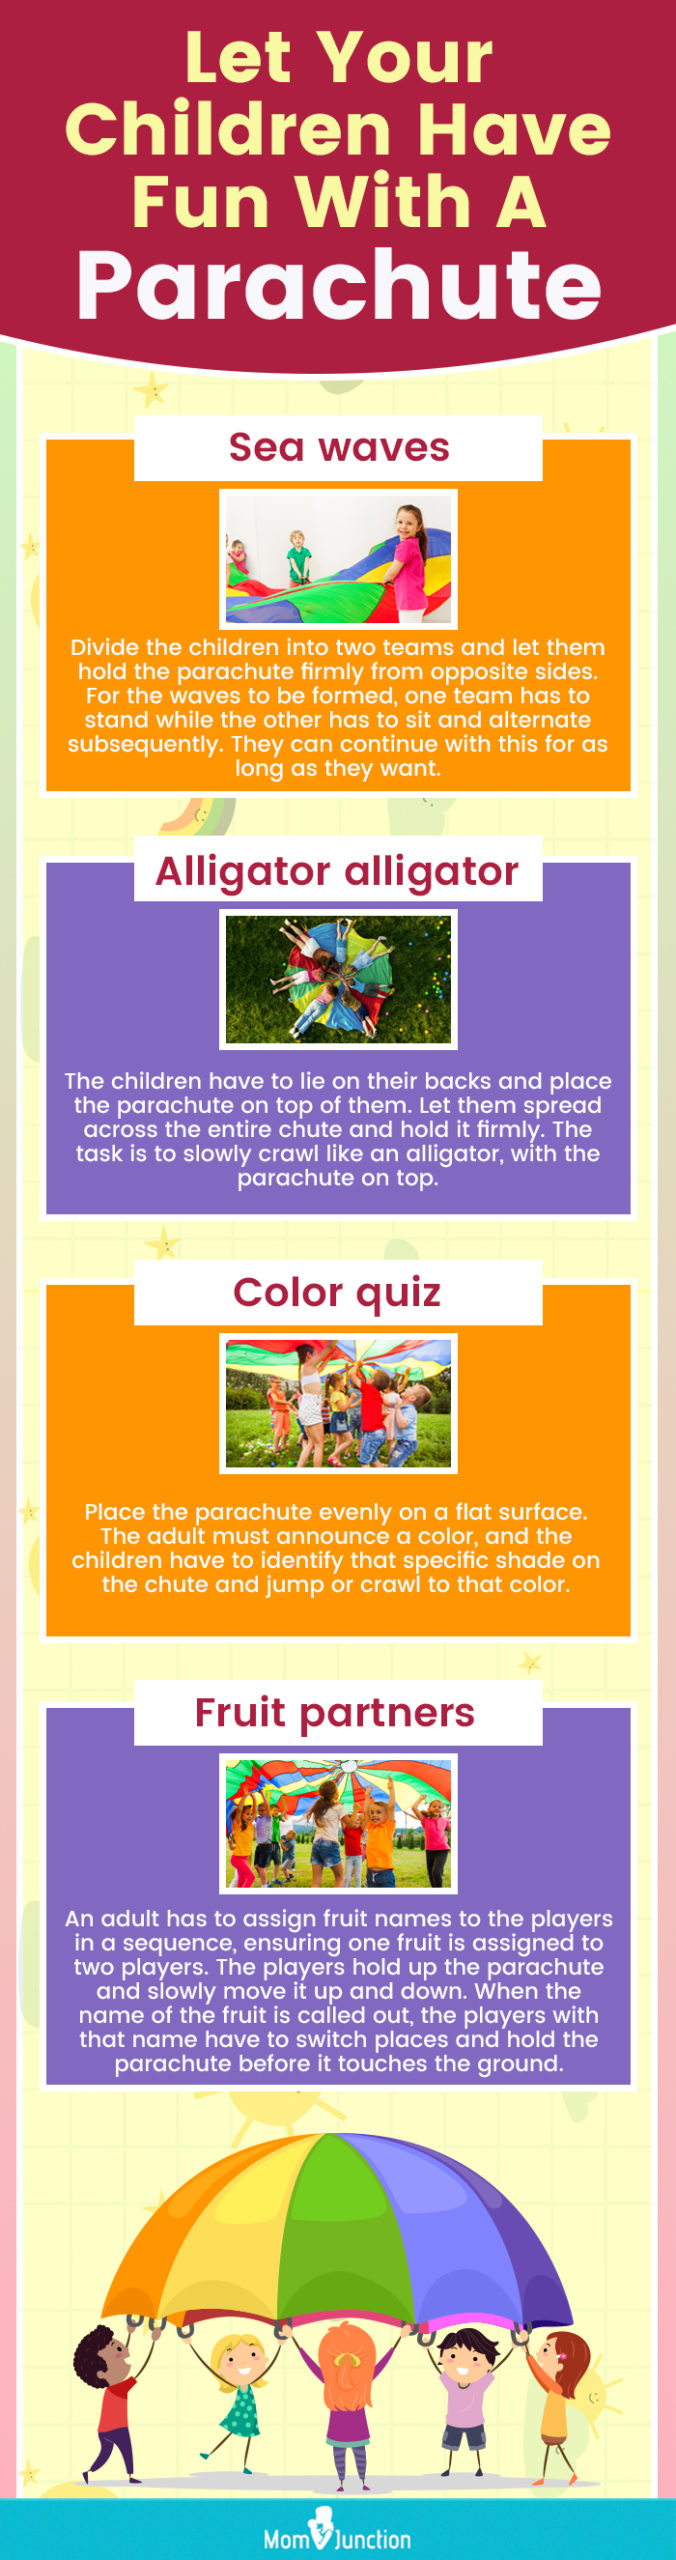 let your children have fun with a parachute (infographic)